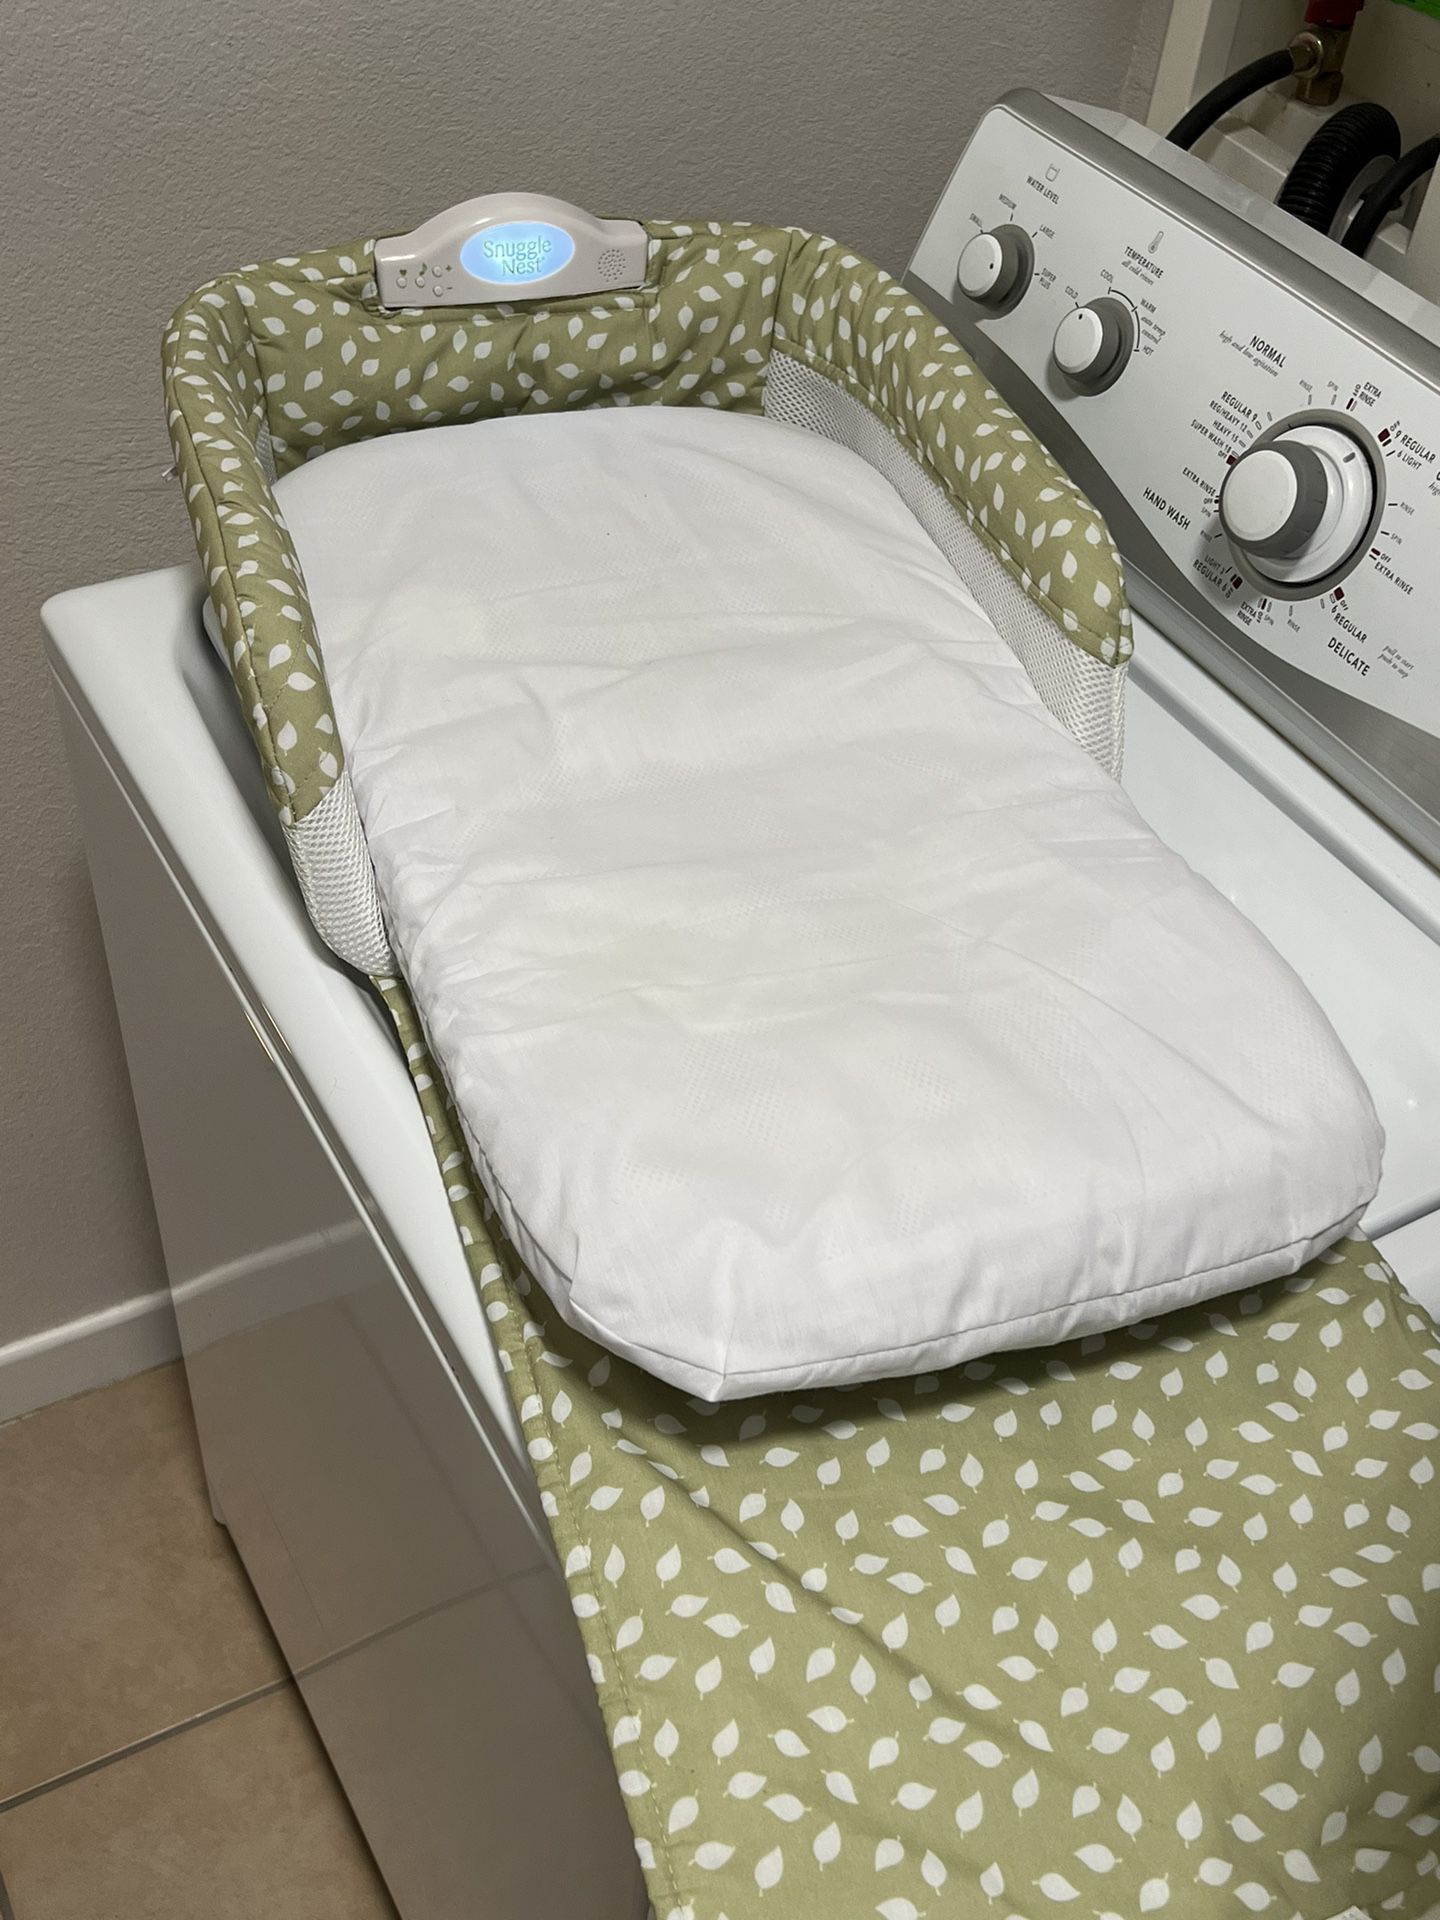 Snuggle Nest Portable Baby Lounger/ Diaper Changing Station 